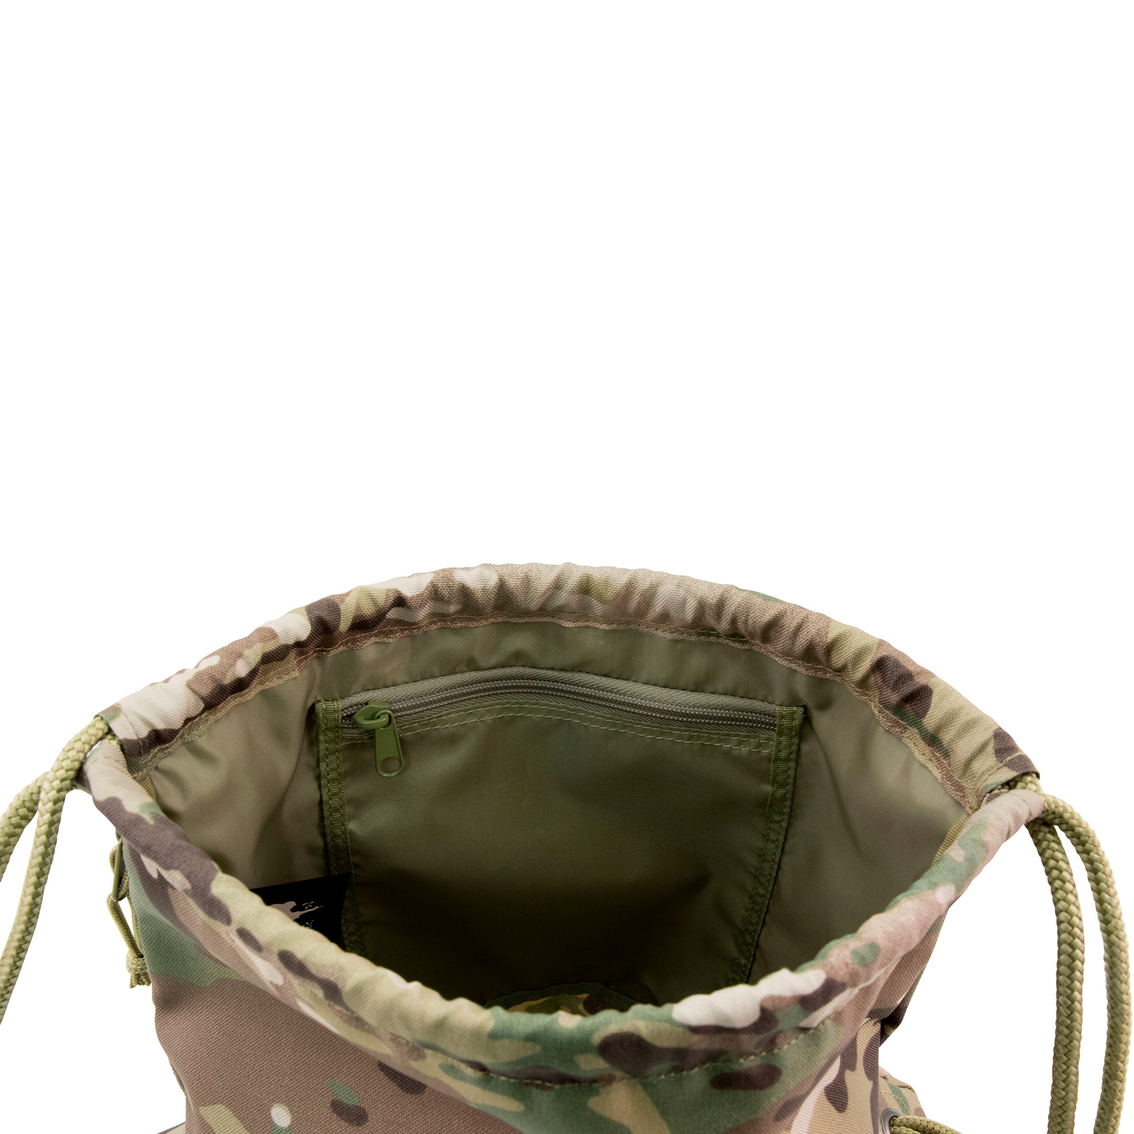 Mercury Tactical Gear Drawstring Backpack - Image 5 of 5